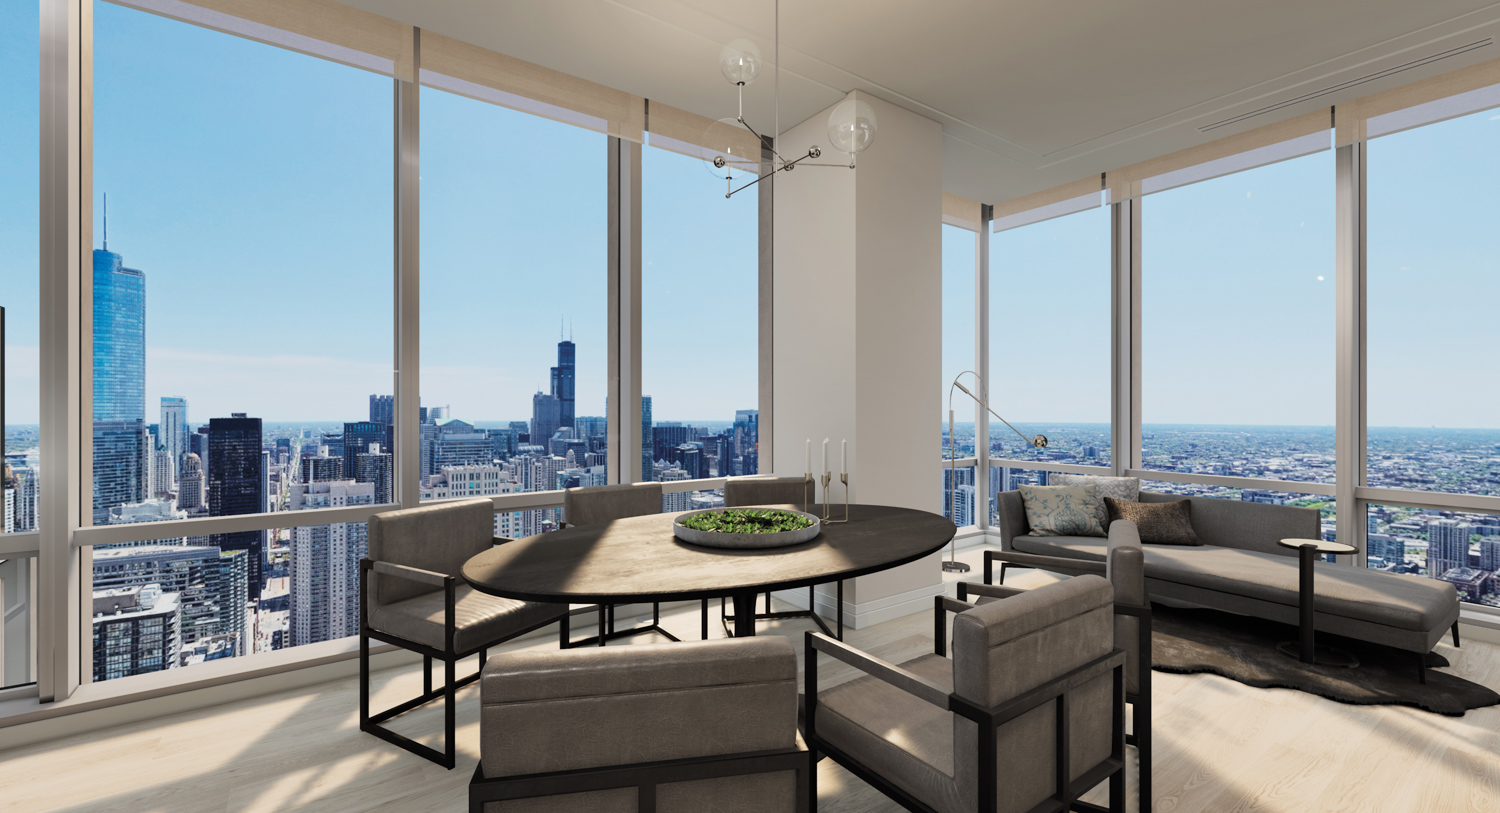 Take A Peek Inside This New Addition To The Chicago Skyline